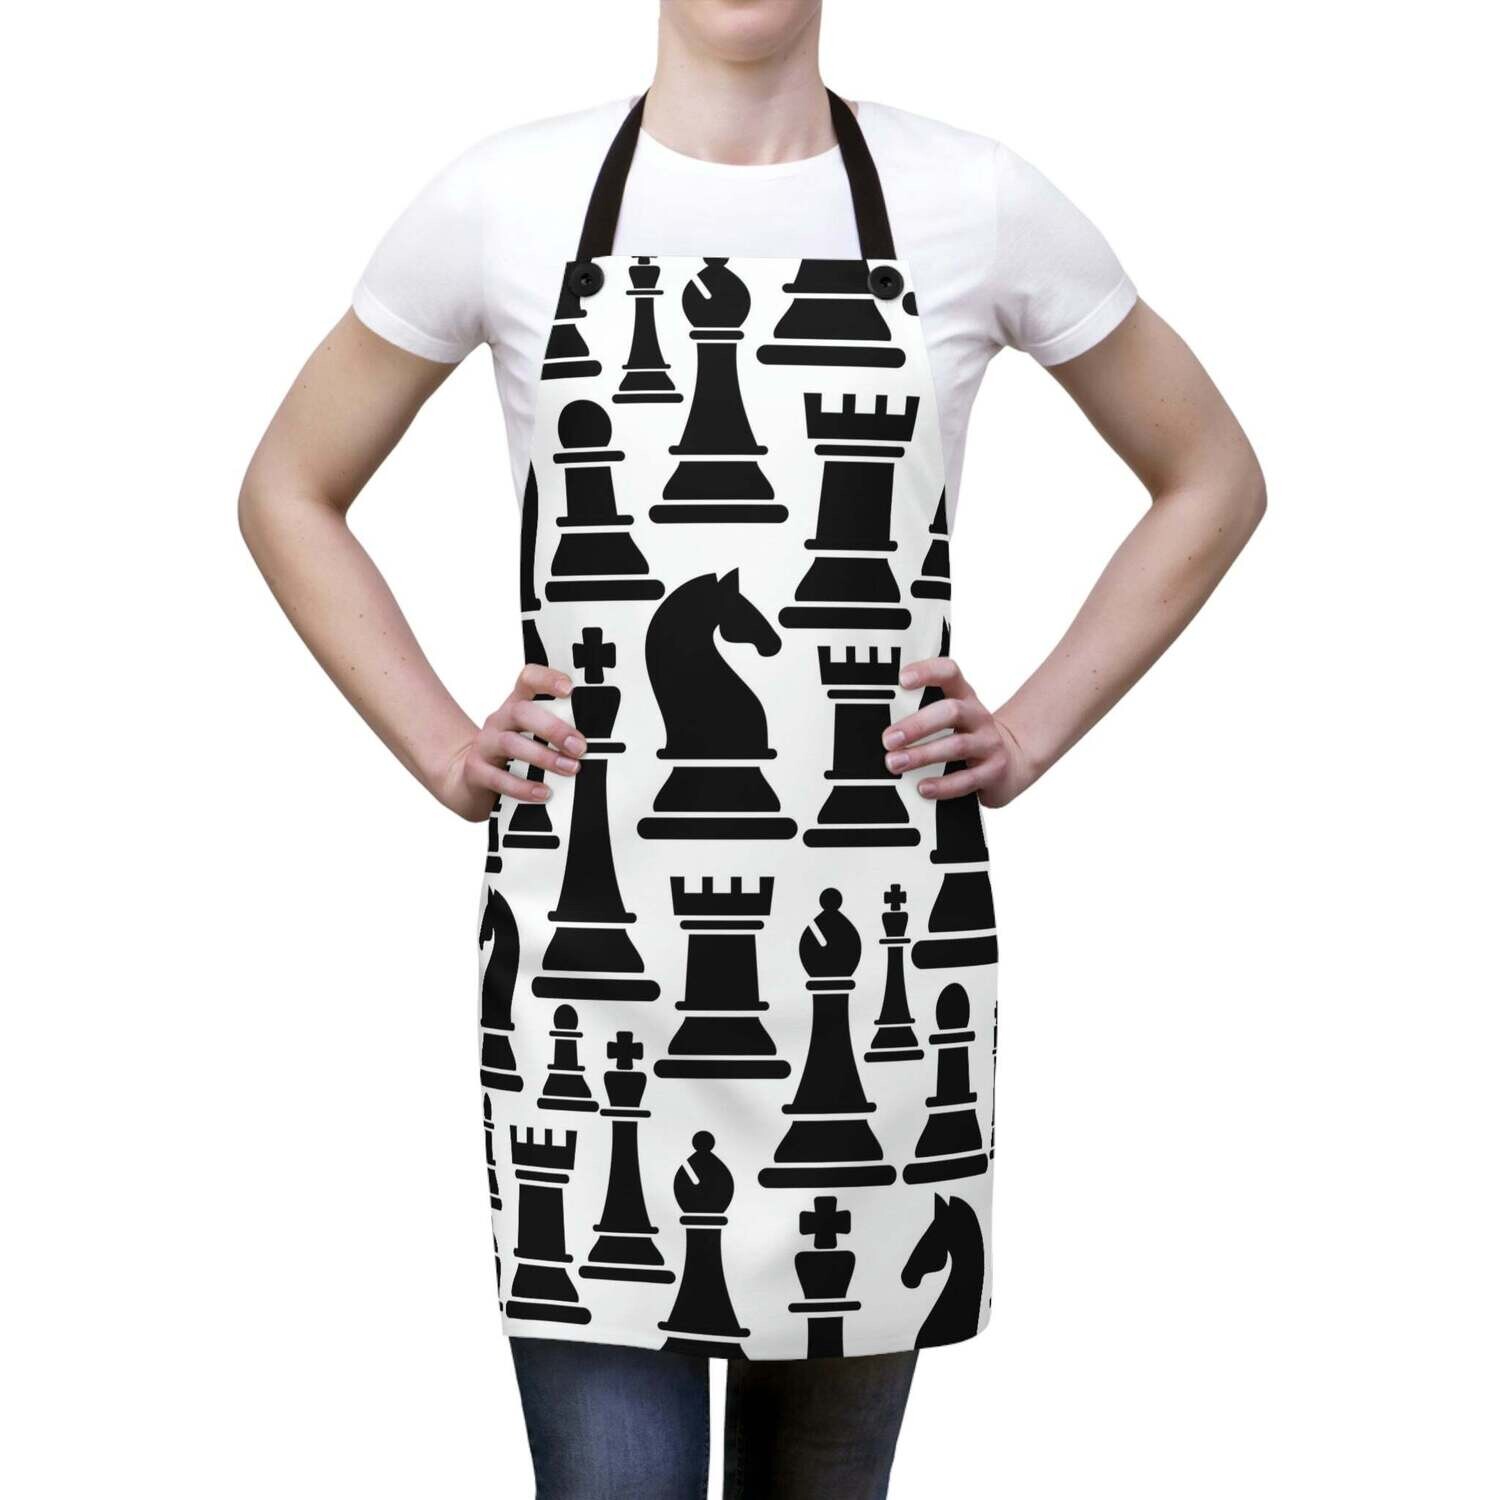 Home Accessories, Unisex Apron Cleaning/Cooking, Black And White Chess Print